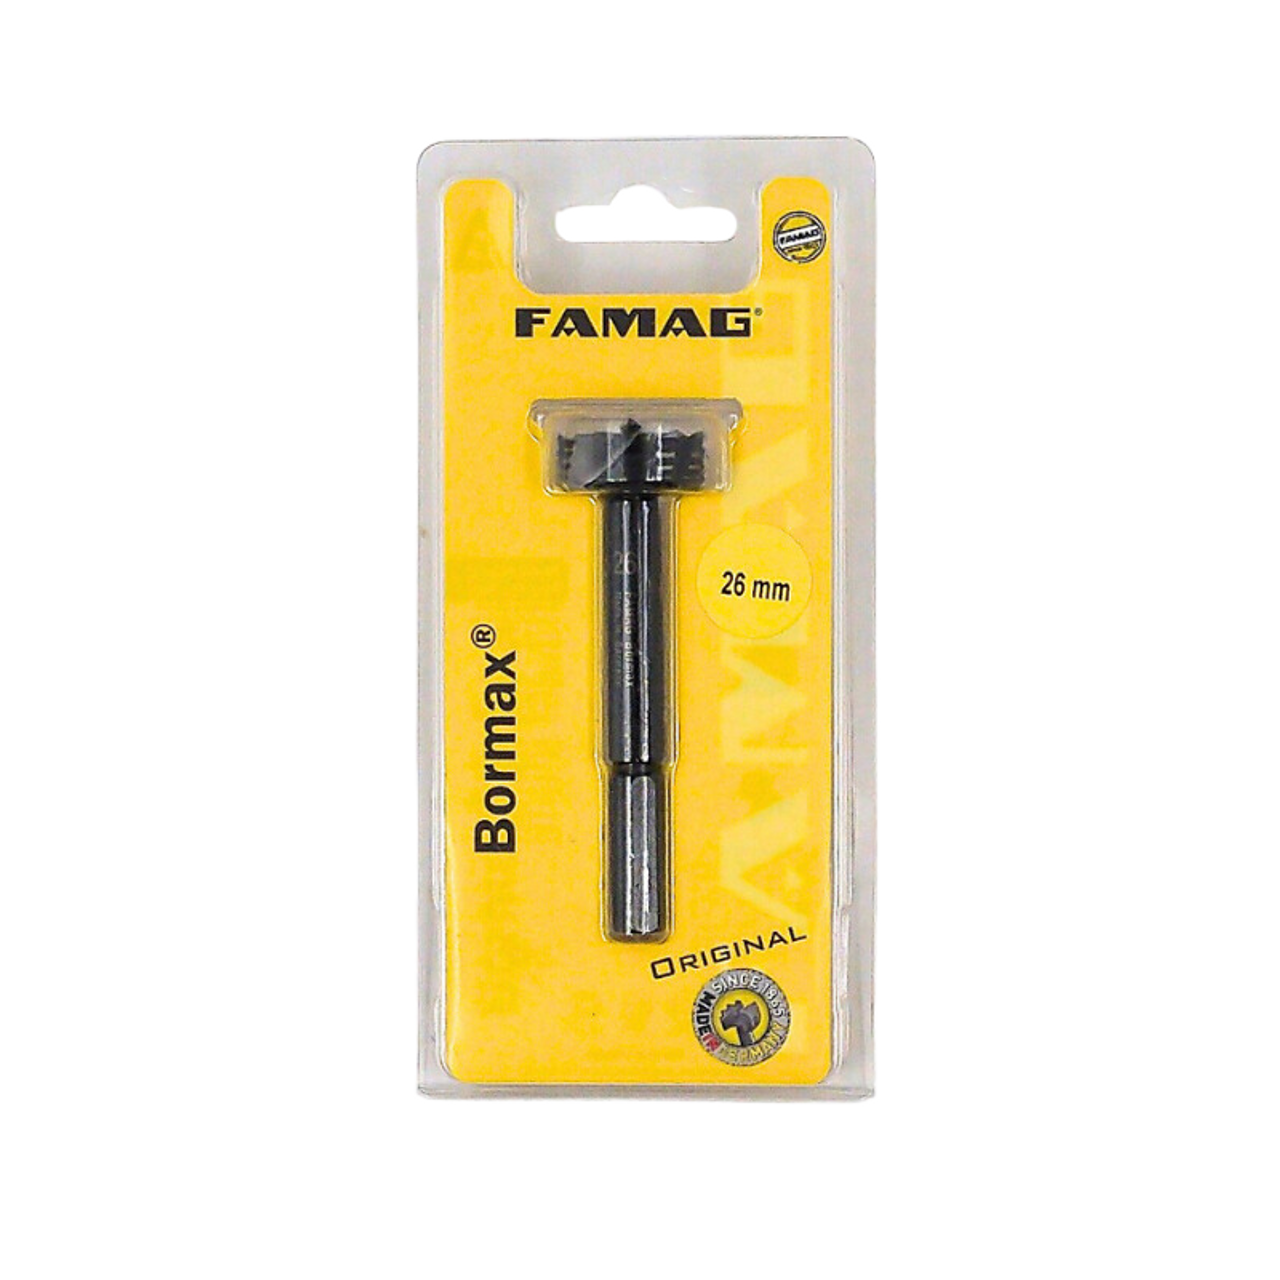 Experience the superior quality of the Famag Forstner Bits 1622 BORMAX 2.0 with its cutting teeth and BORMAX 2.0 coating, perfect for demanding woodworking projects.